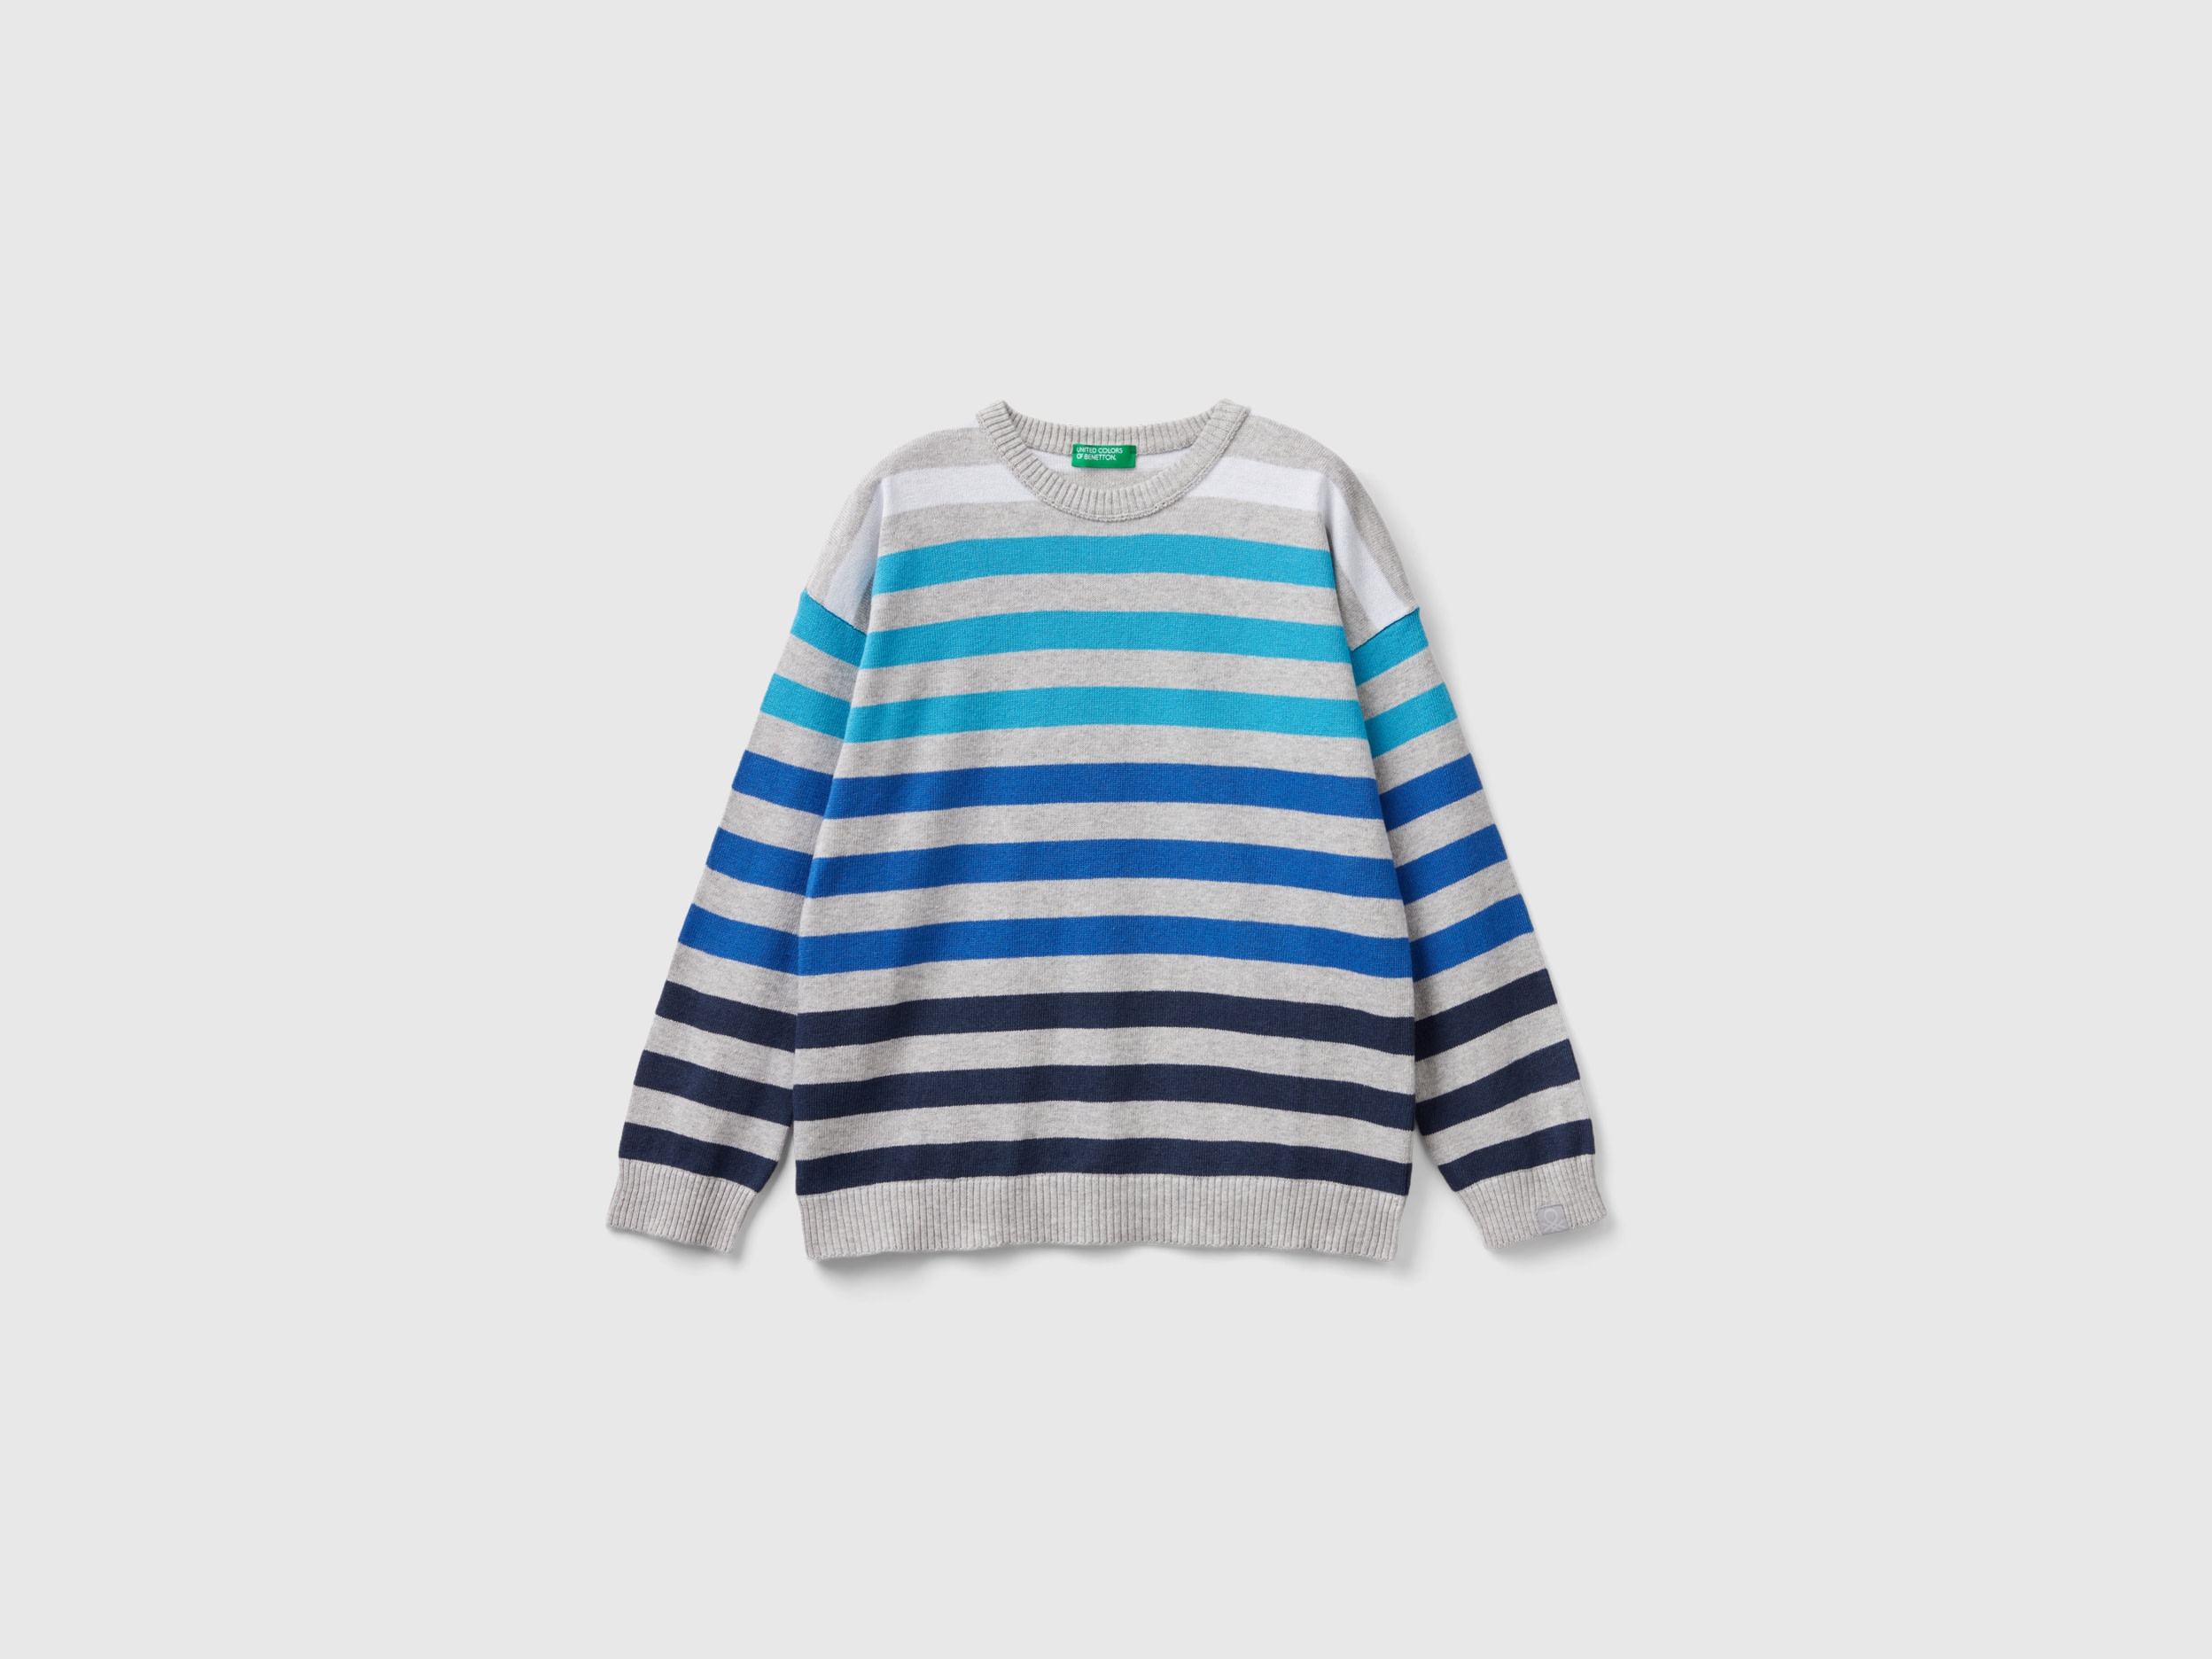 Image of Benetton, Striped Sweater, size S, Light Gray, Kids